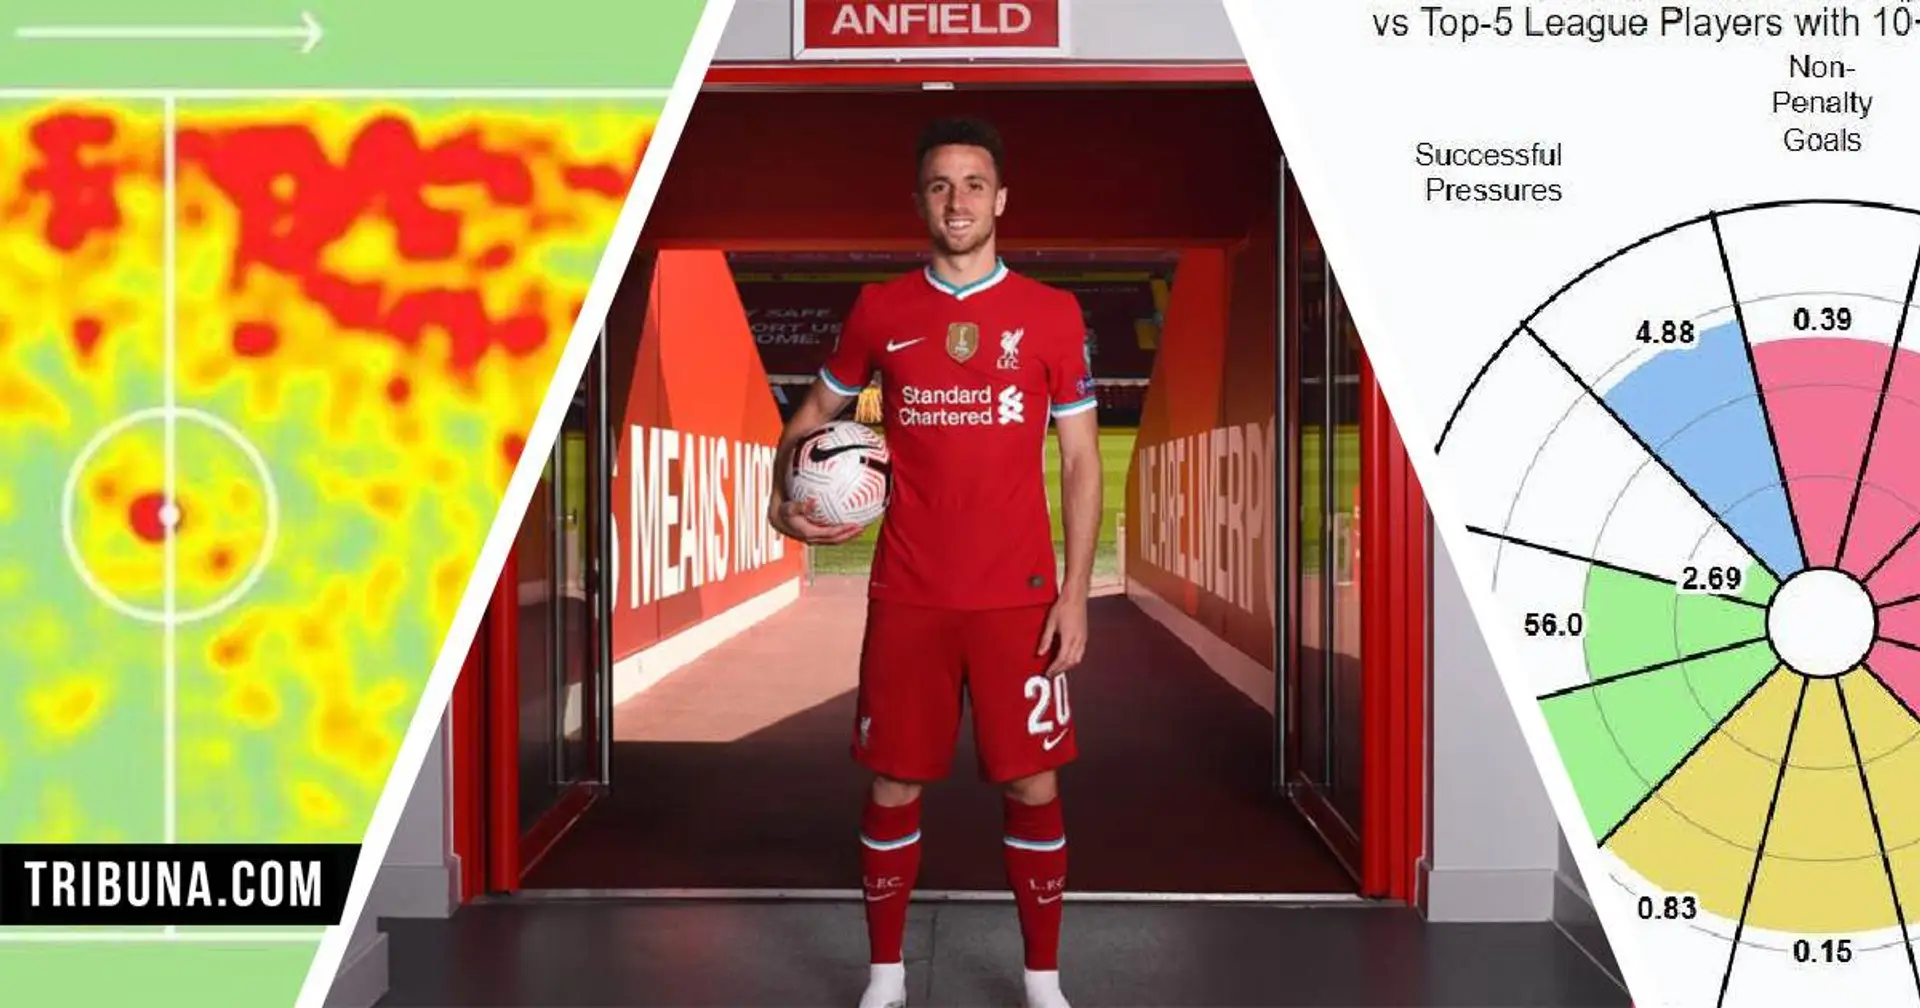 Versatile pressing machine with bags of potential: Profiling Diogo Jota and what he brings to Liverpool